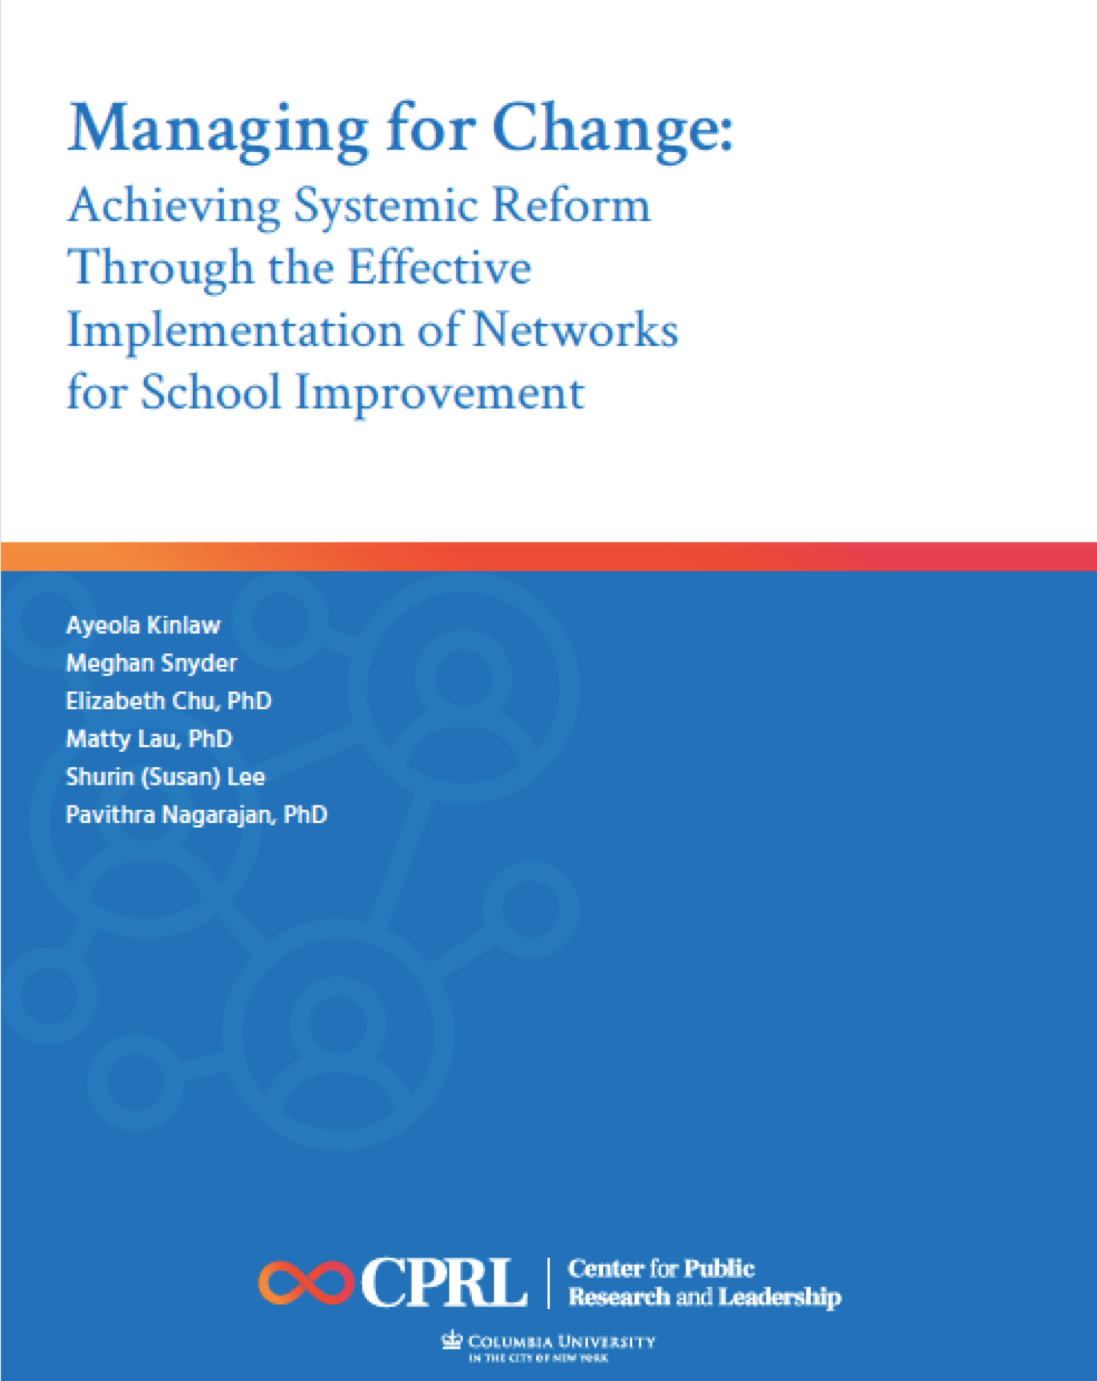 Cover of Managing Chance report. 